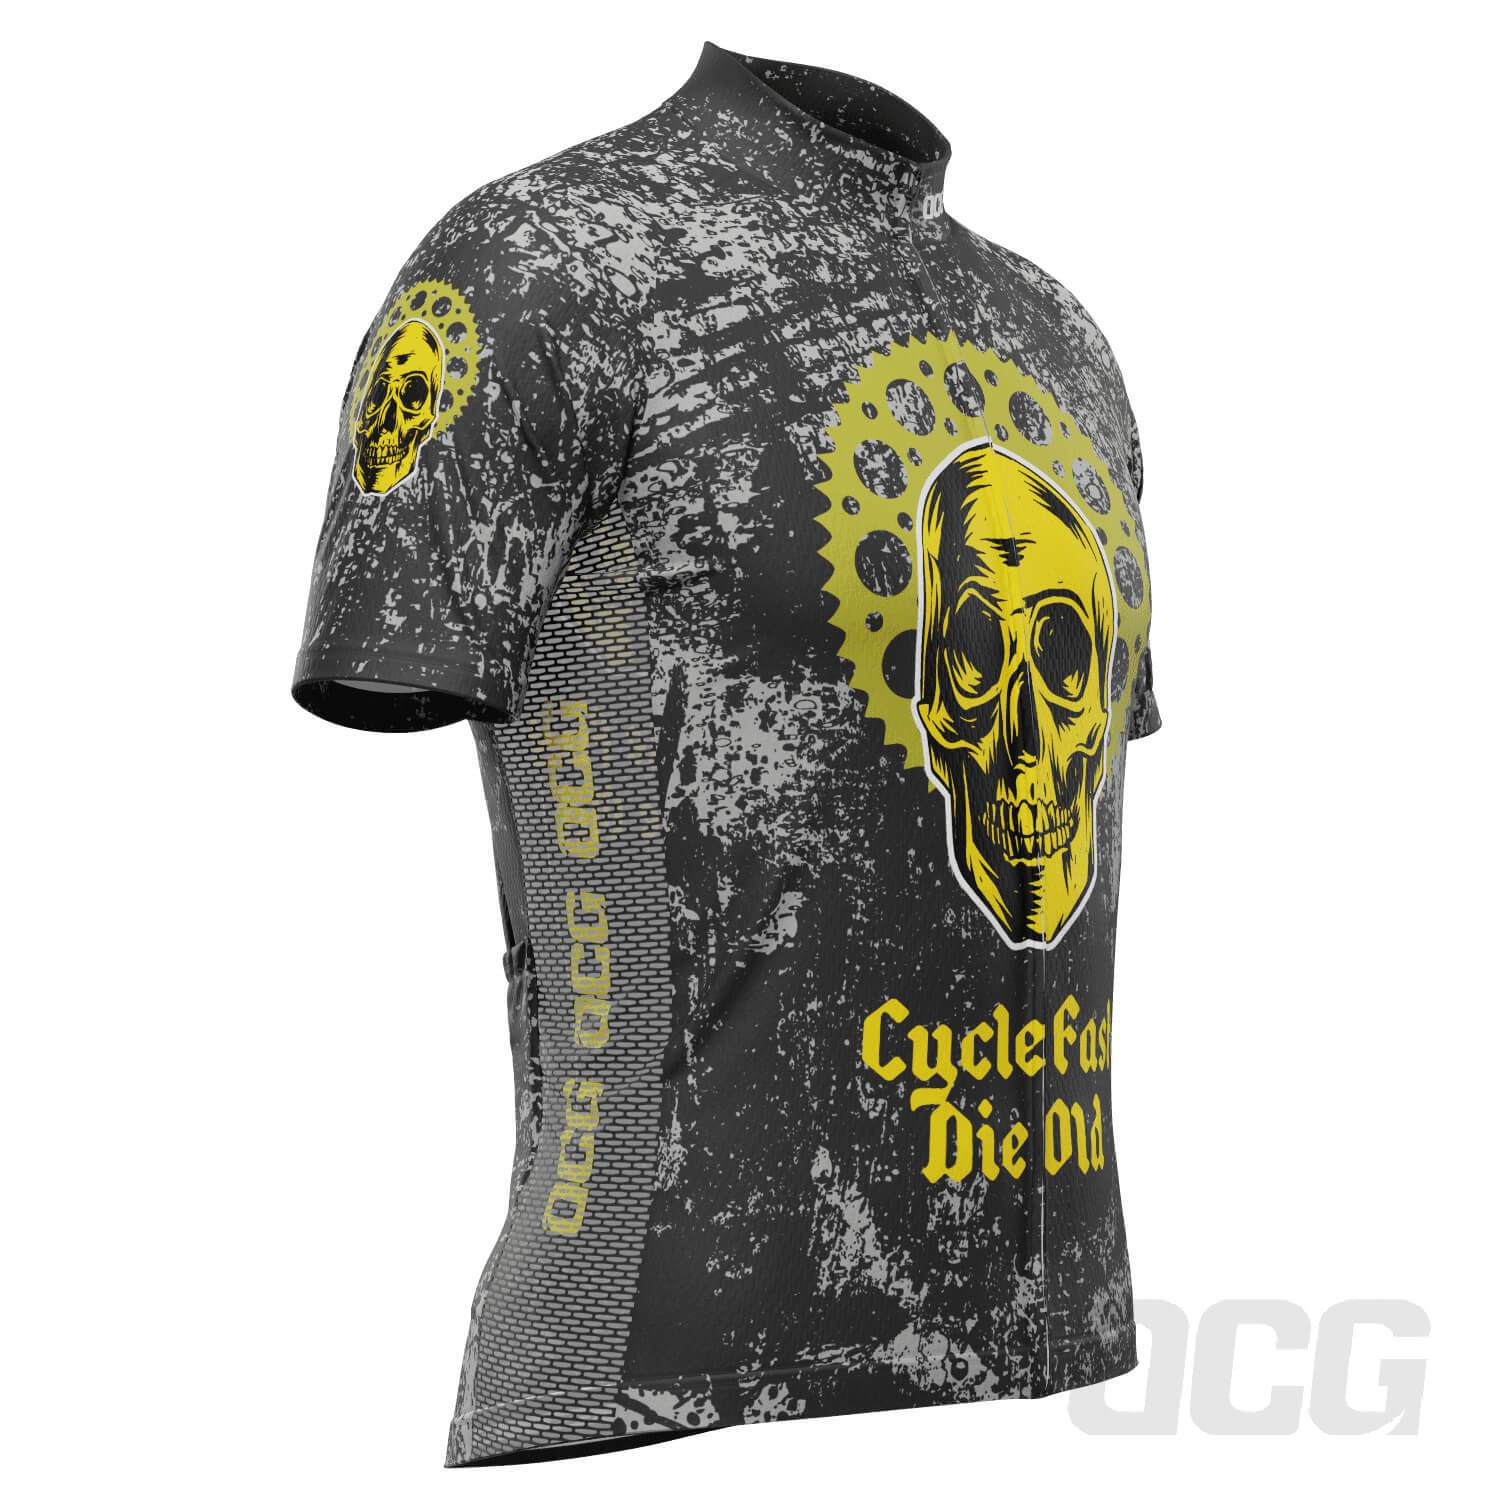 Men's Cycle Fast Die Old Short Sleeve Cycling Jersey